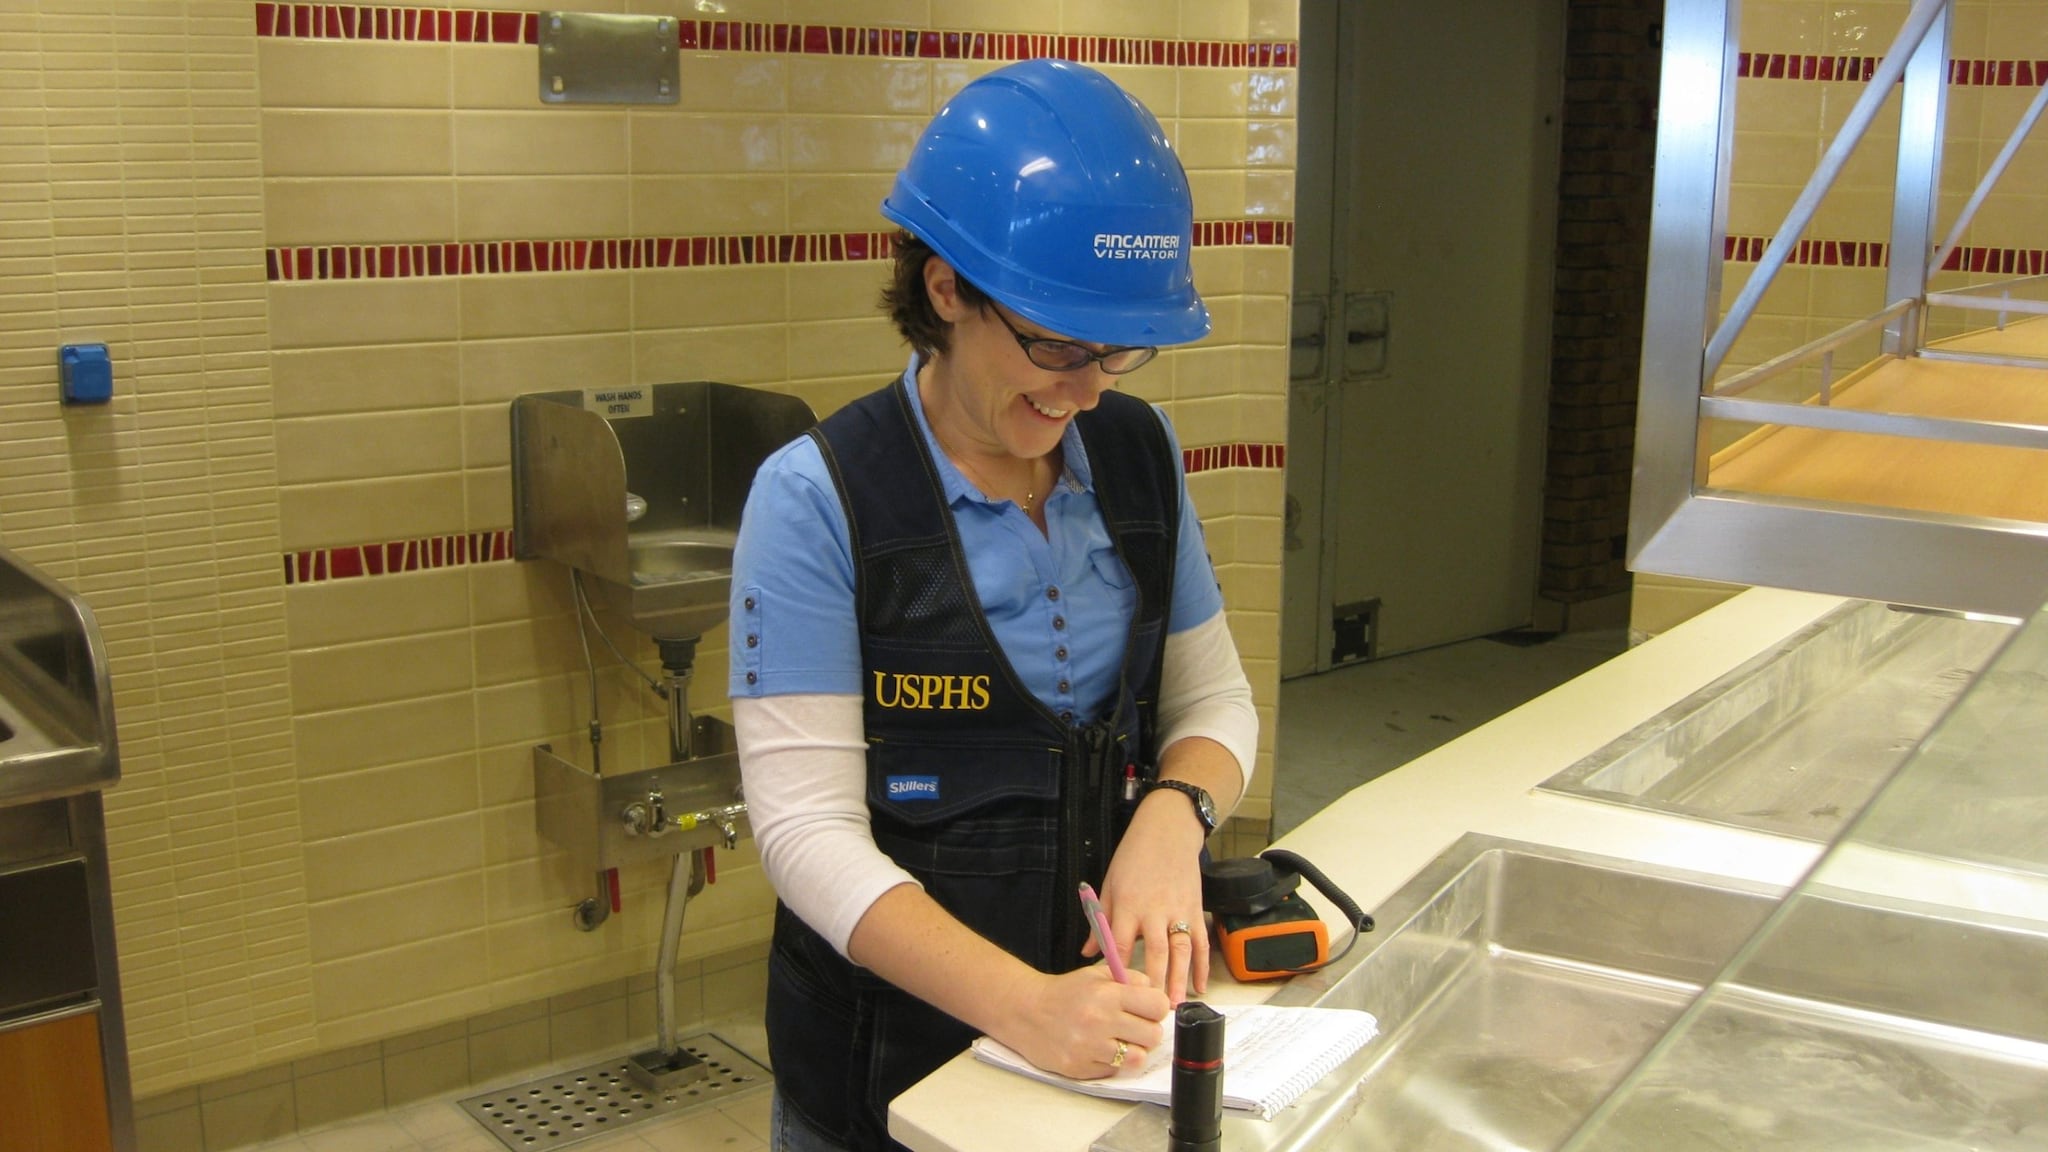 Public health officer wearing a hard hat taking notes on a clipboard inside a galley.